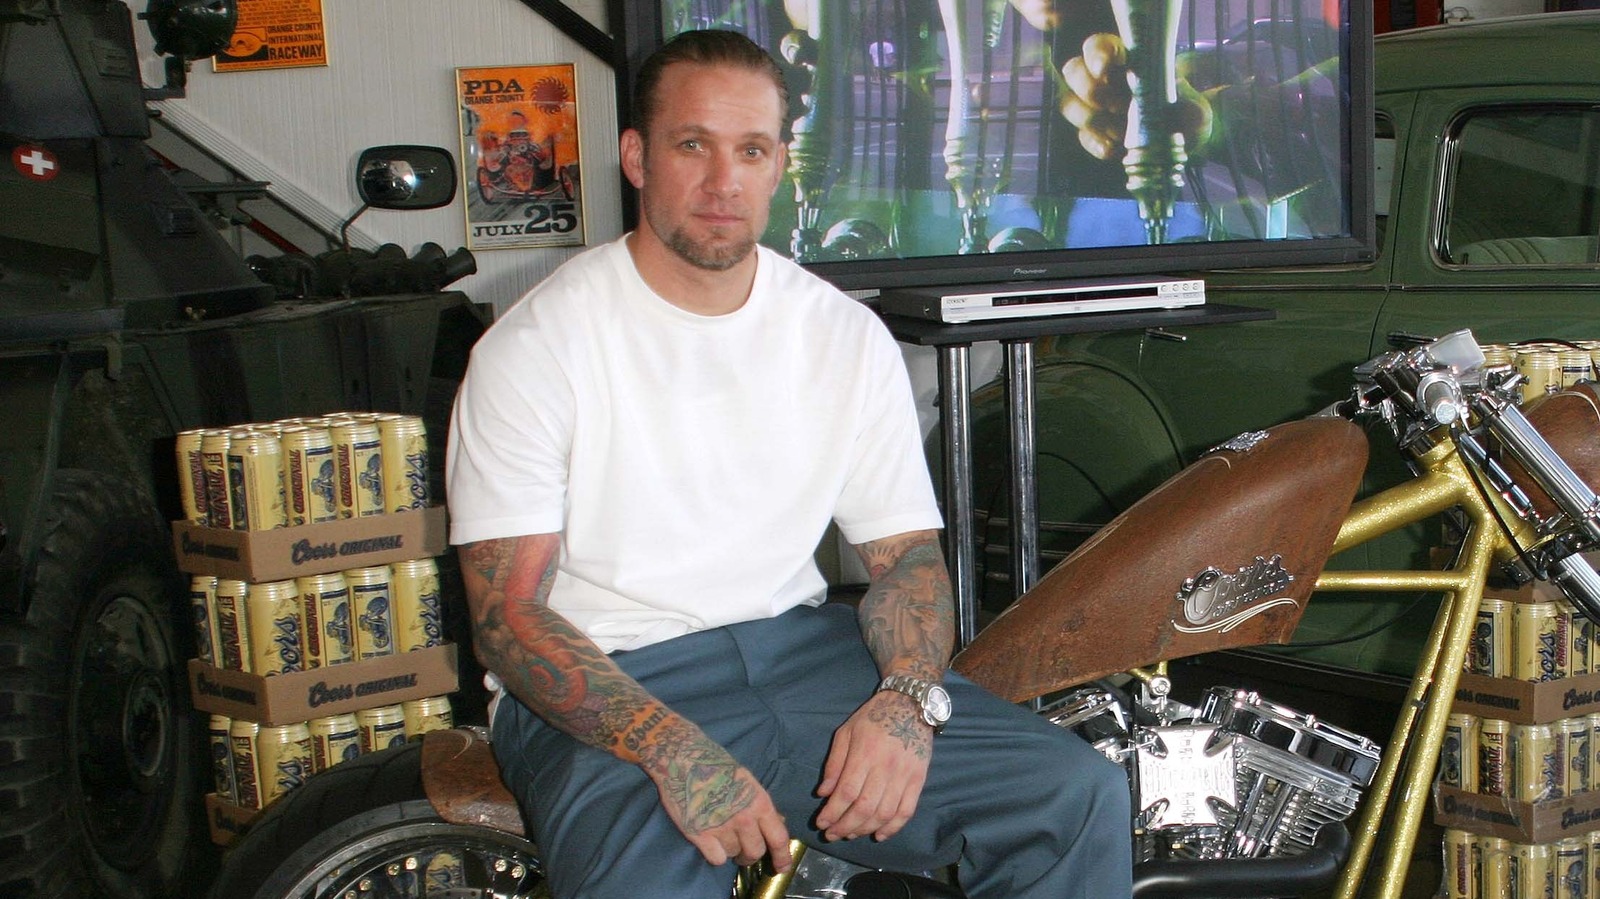 With West Coast Choppers Closed, Jesse James Plots Next Move - The